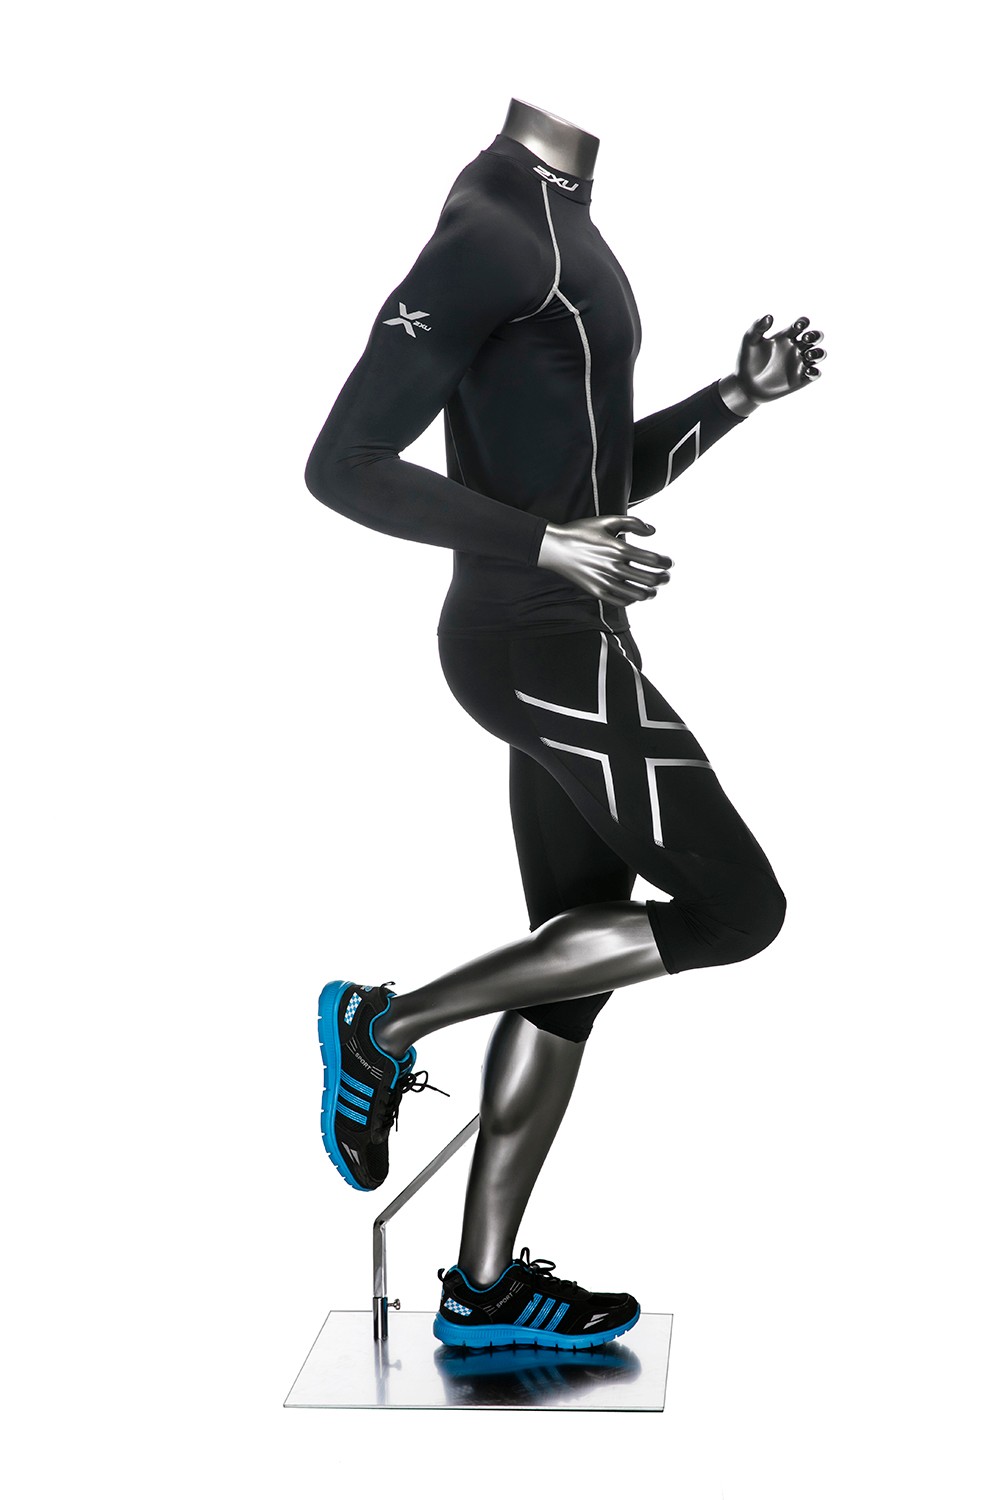 Athletic Running Headless Sports Male Mannequin MM-NI4 - Mannequin